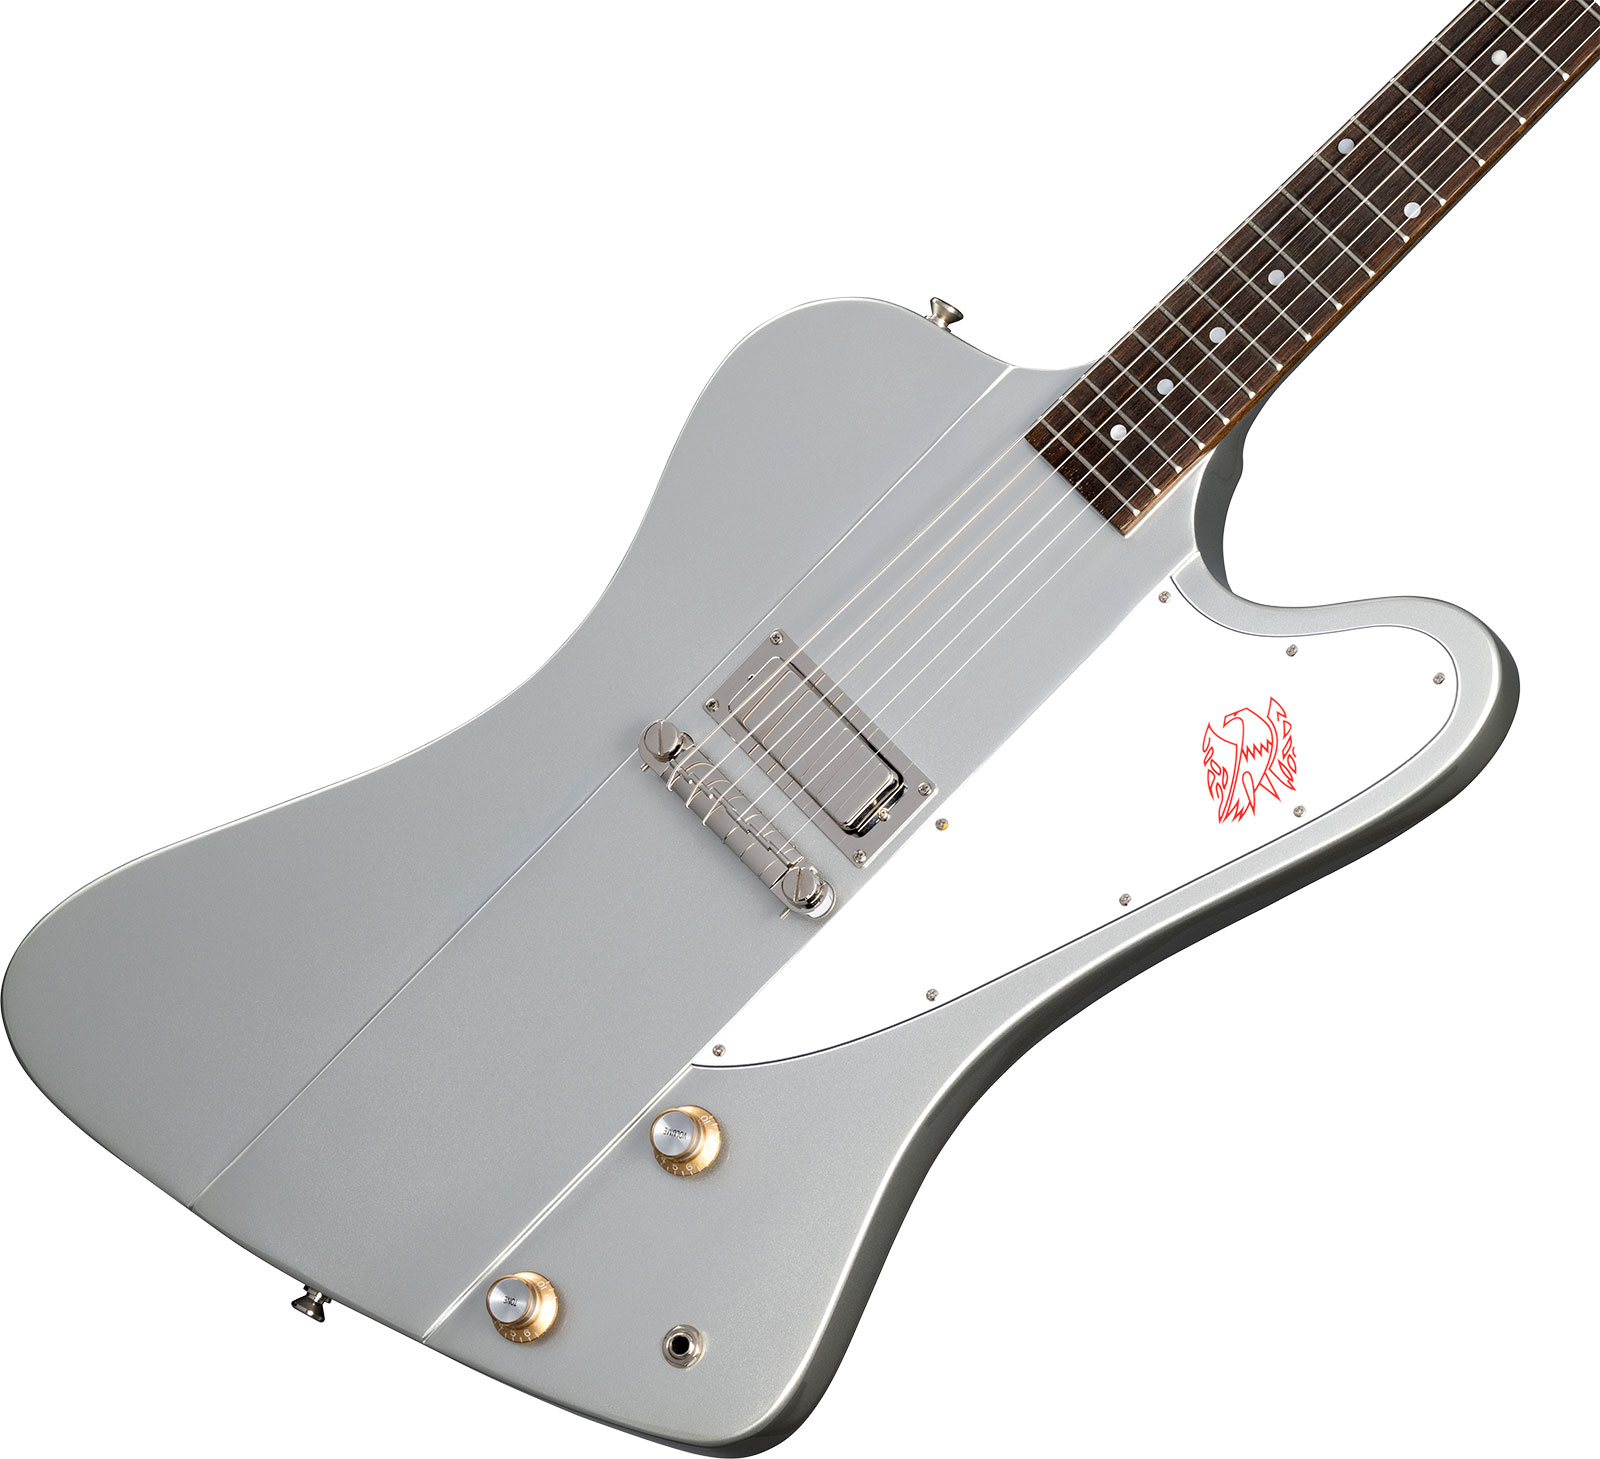 Epiphone Firebird I 1963 Inspired By Gibson Custom 1mh Ht Lau - Silver Mist - Guitare Électrique RÉtro Rock - Variation 3